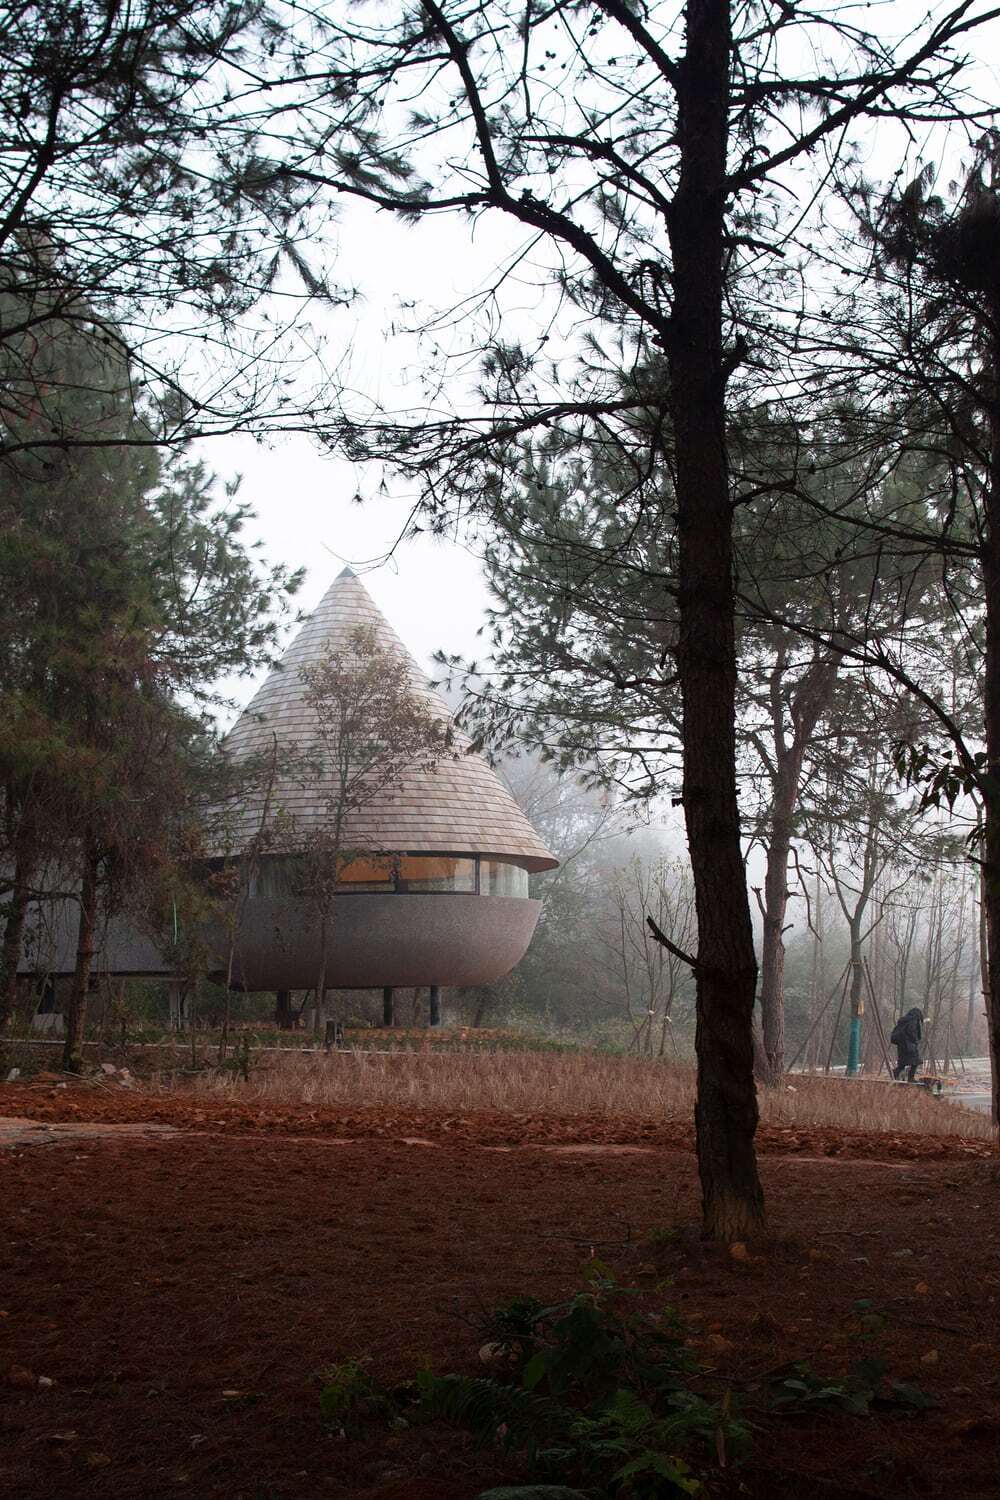 A Mushroom-Formed Wood House in the Forest